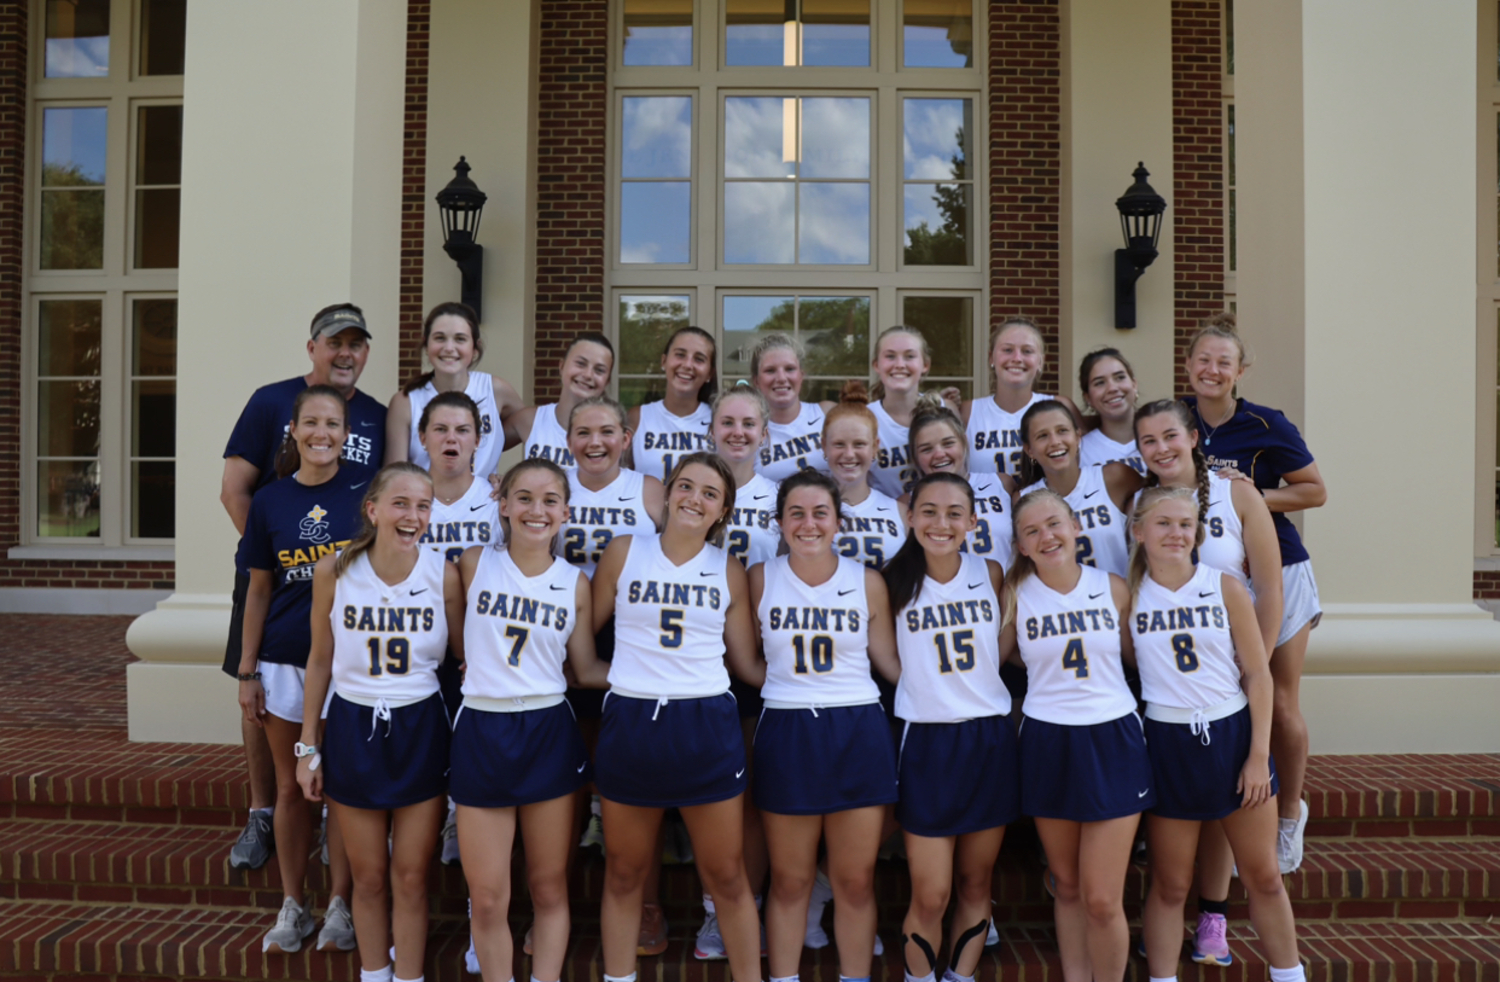 Pierson graduate Kasey Gilbride is now the head coach of the varsity field hockey team at St. Catherine's High School in Virginia.